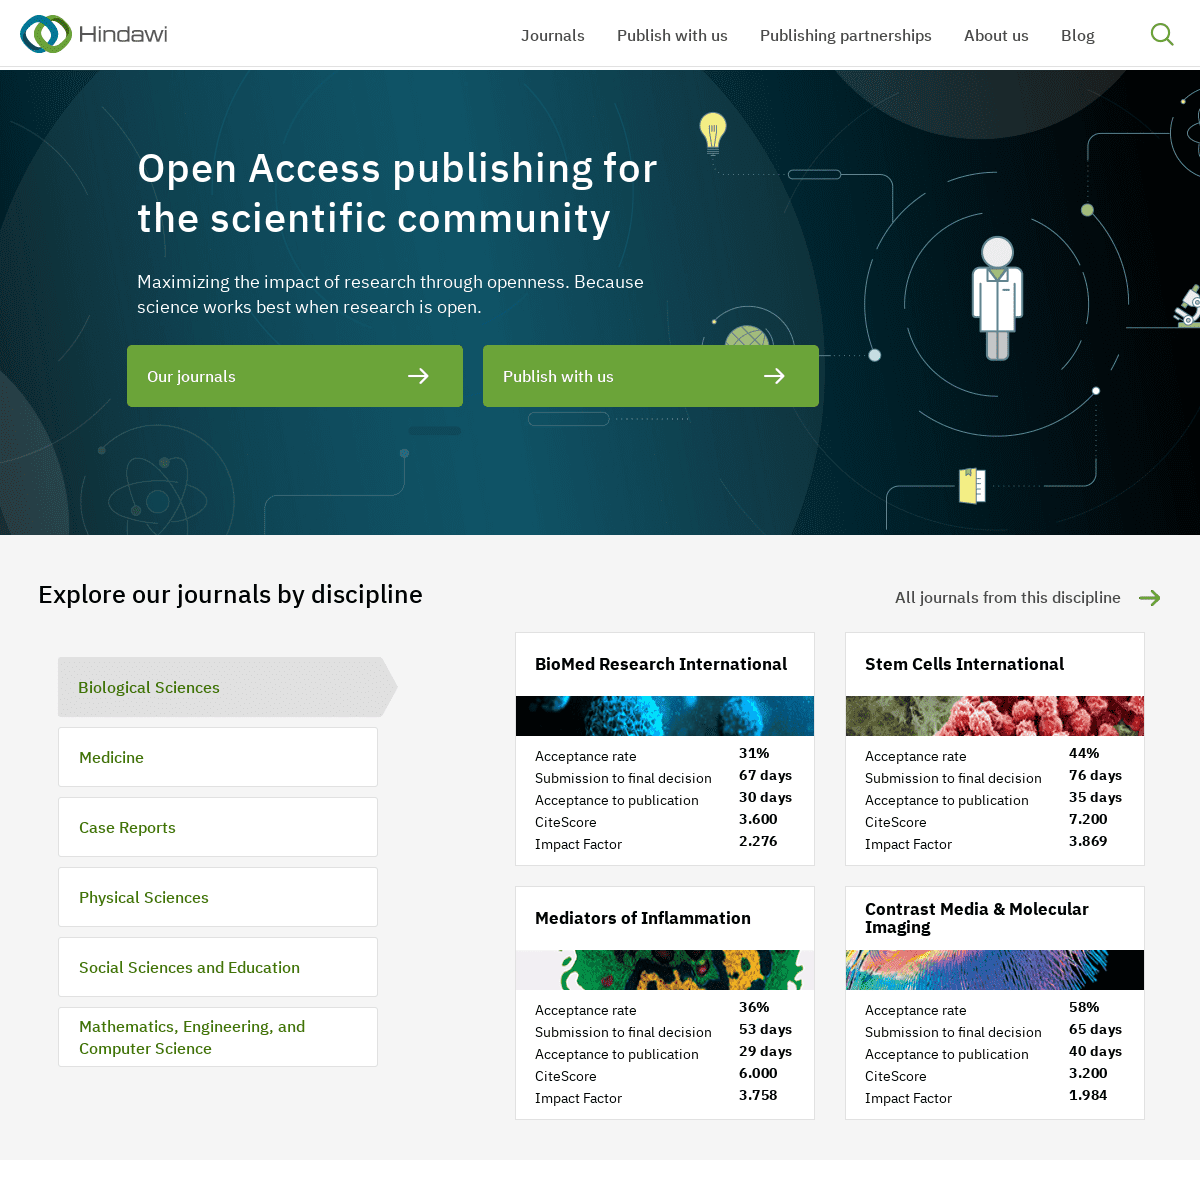 A complete backup of https://hindawi.com